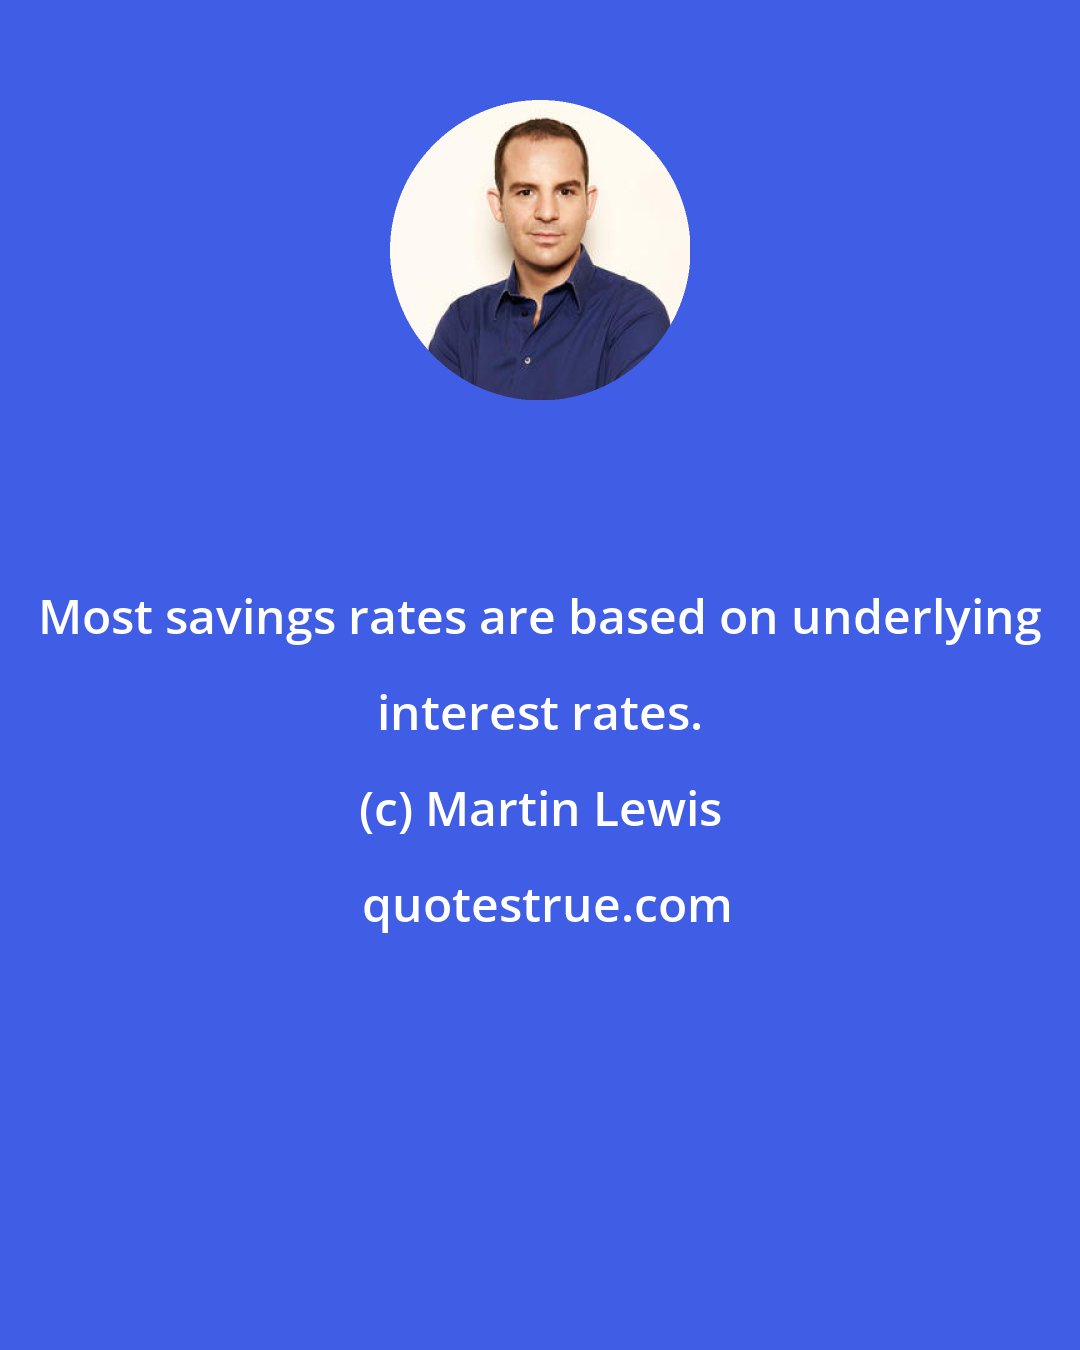 Martin Lewis: Most savings rates are based on underlying interest rates.